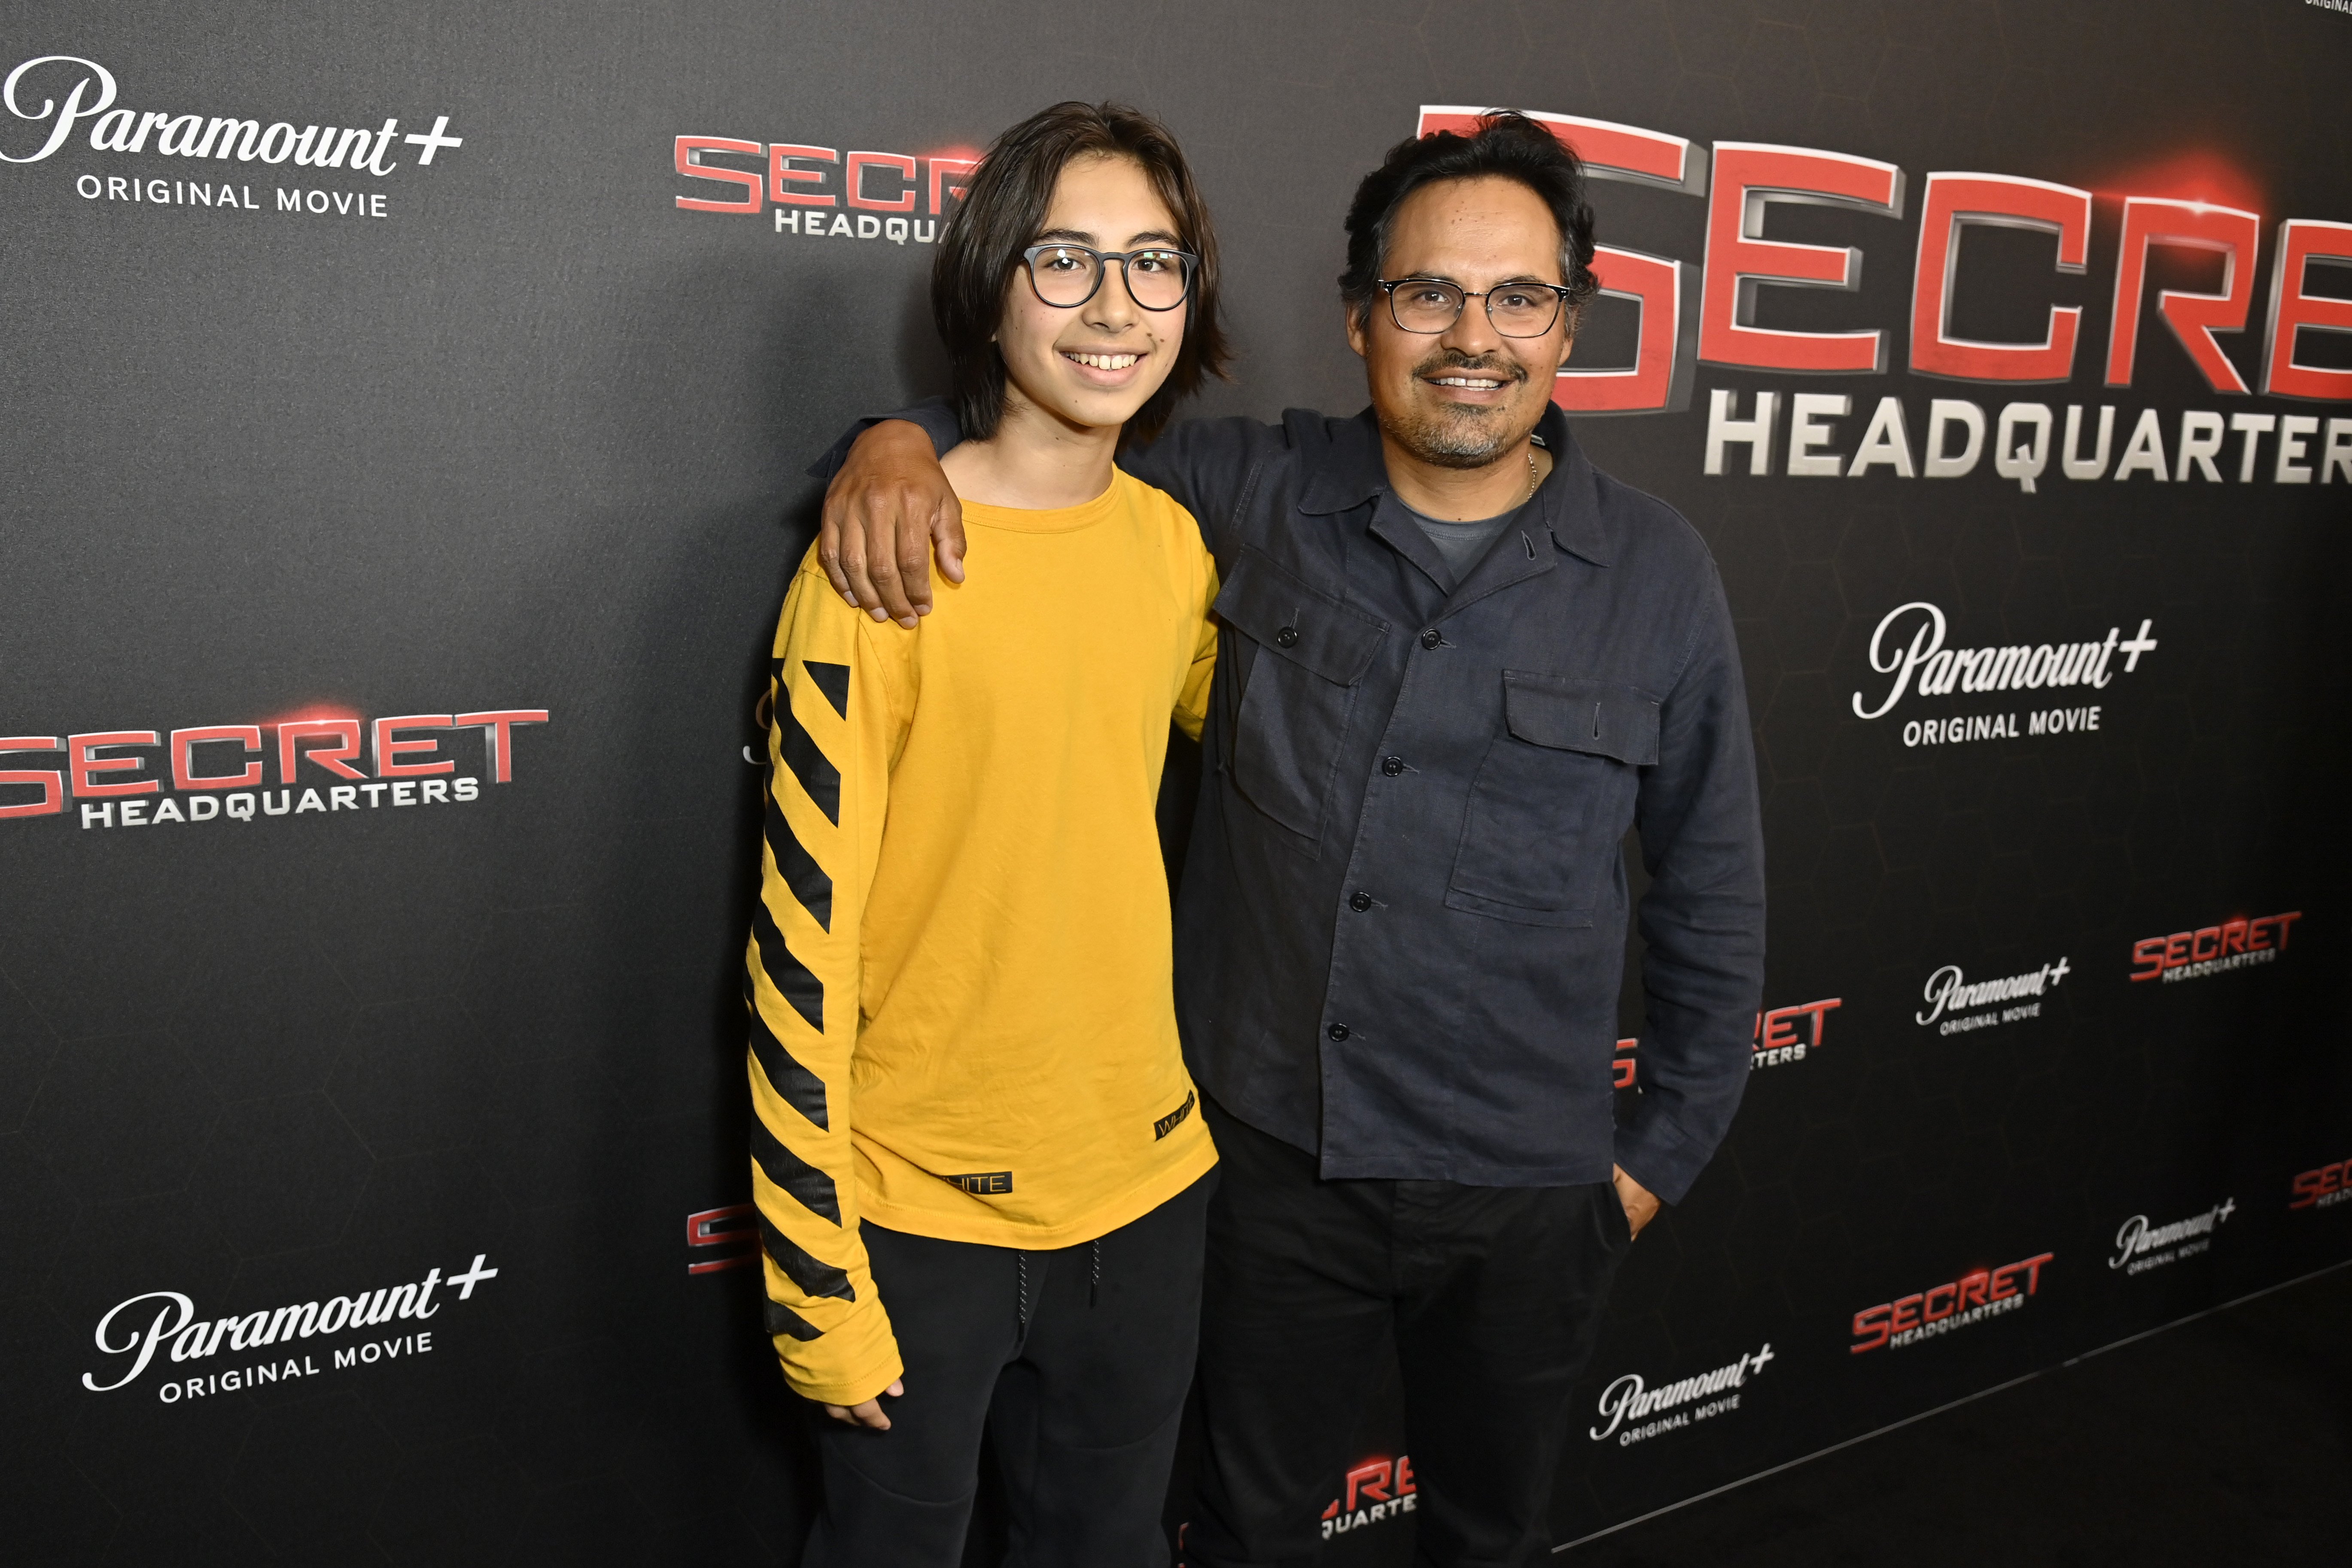 Roman Peña and actor Michael Peña attend the Paramount+ "Secret Headquarters" premiere at Signature Theater on August 8, 2022, in New York City. | Source: Getty Images